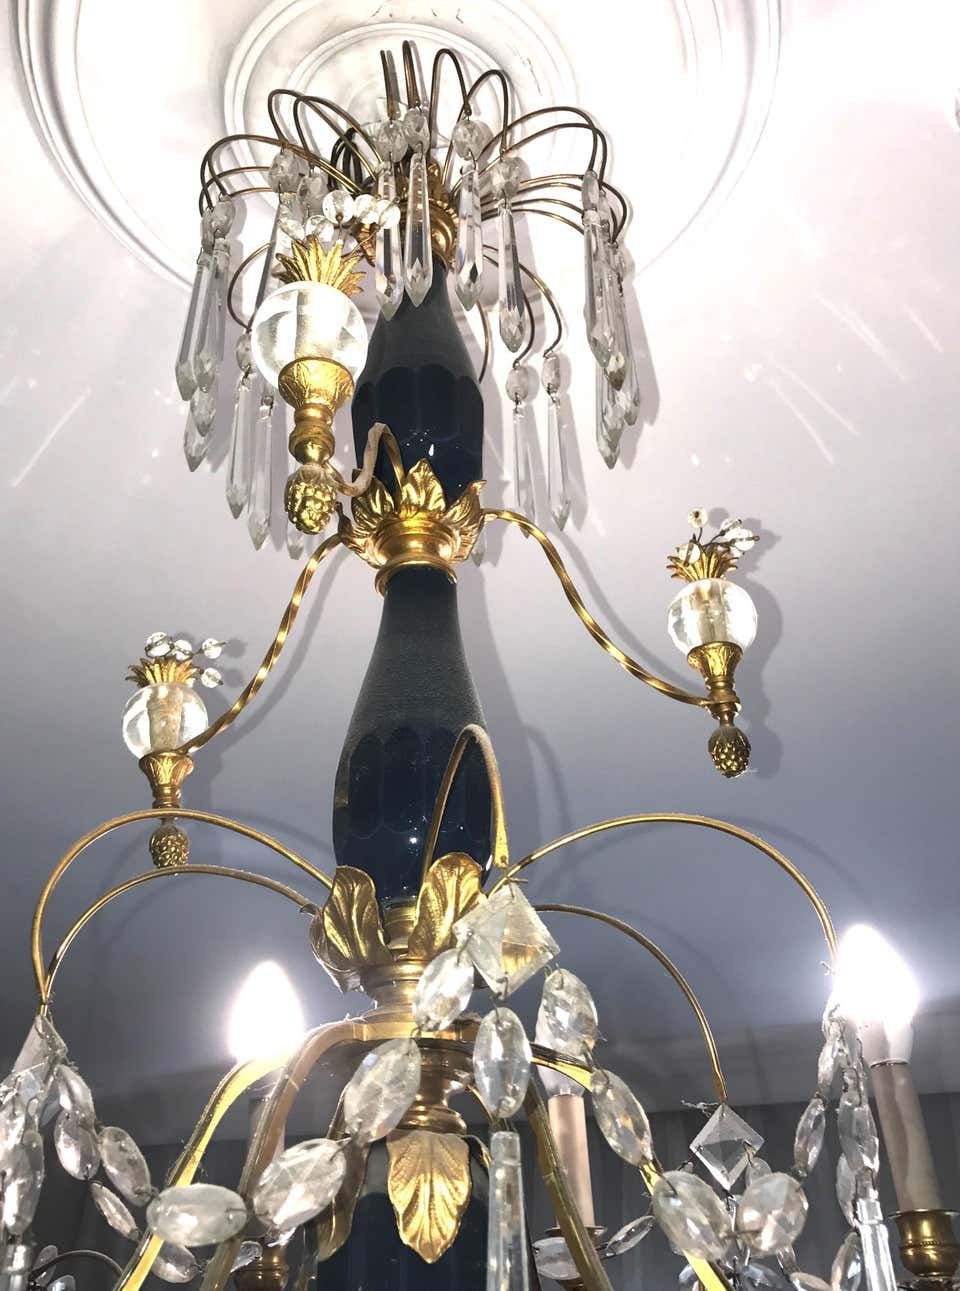 Circa 1920 Neoclassical Crystal and Gilt Bronze Chandelier